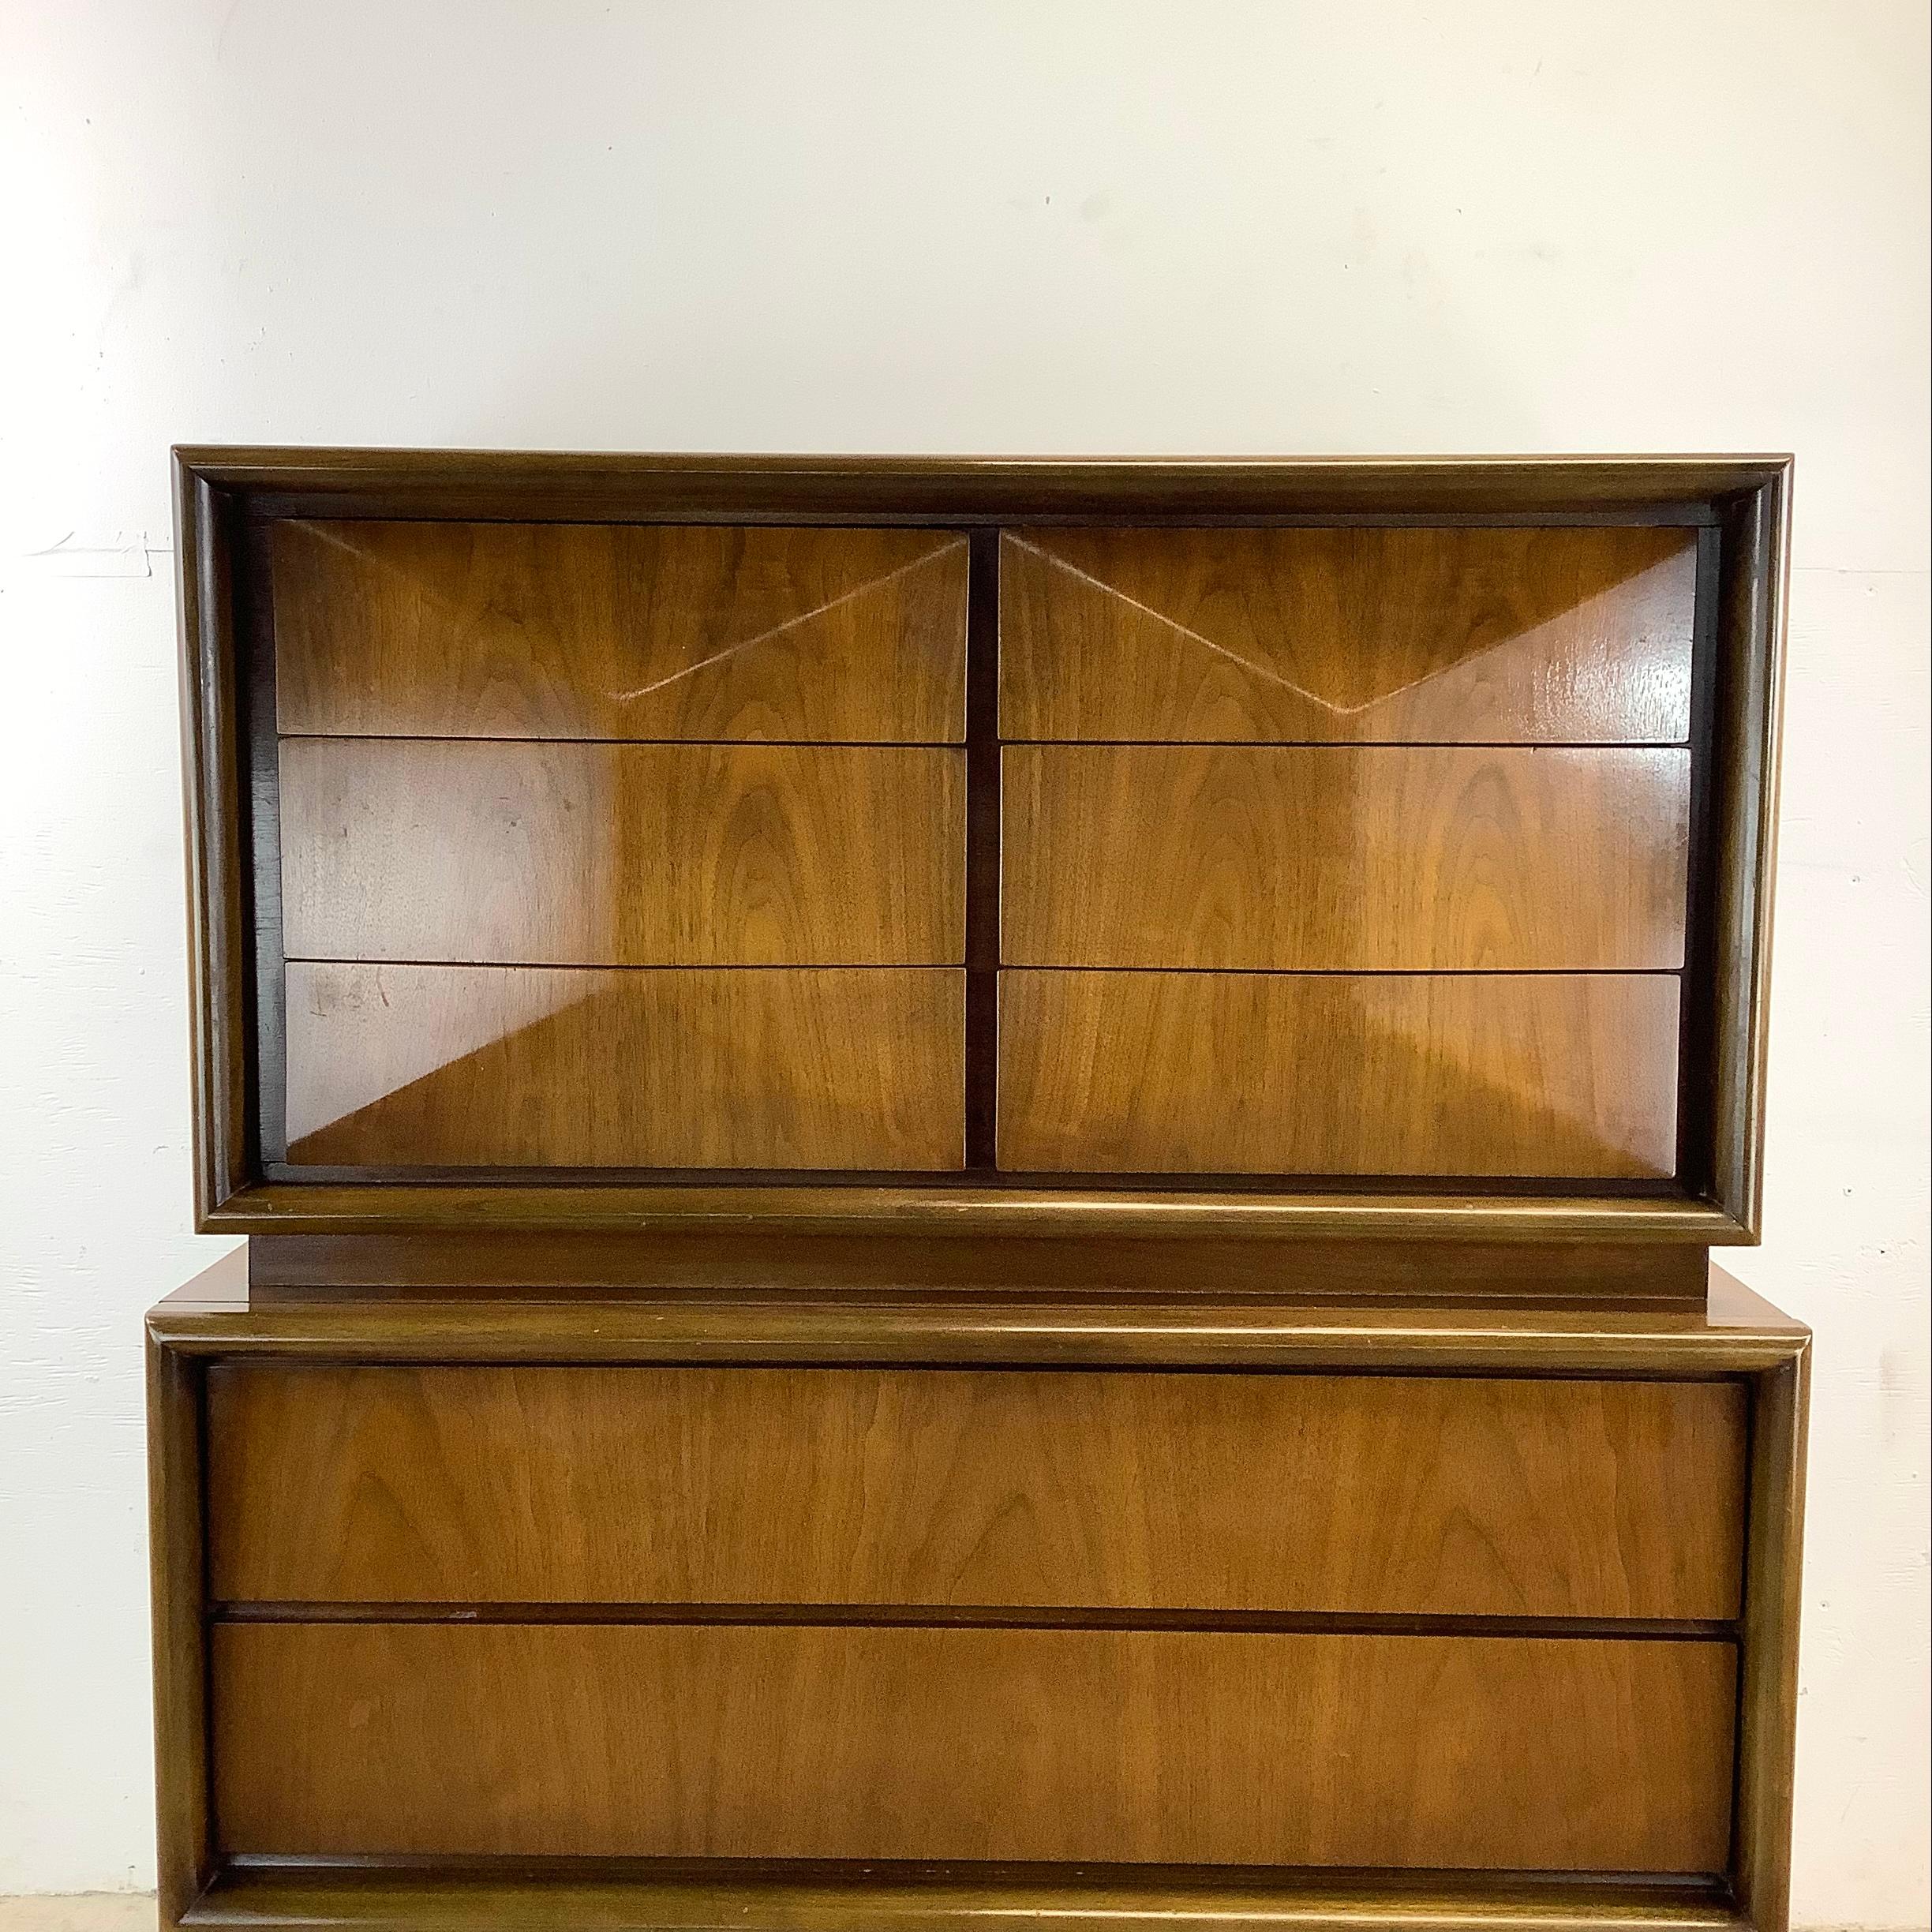 Elevate your living space with this mid-century walnut highboy from United Furniture, a sought after manufacturer of vintage modern design. This tall eight drawer dresser, with its streamlined silhouette and rich walnut finish, embodies the